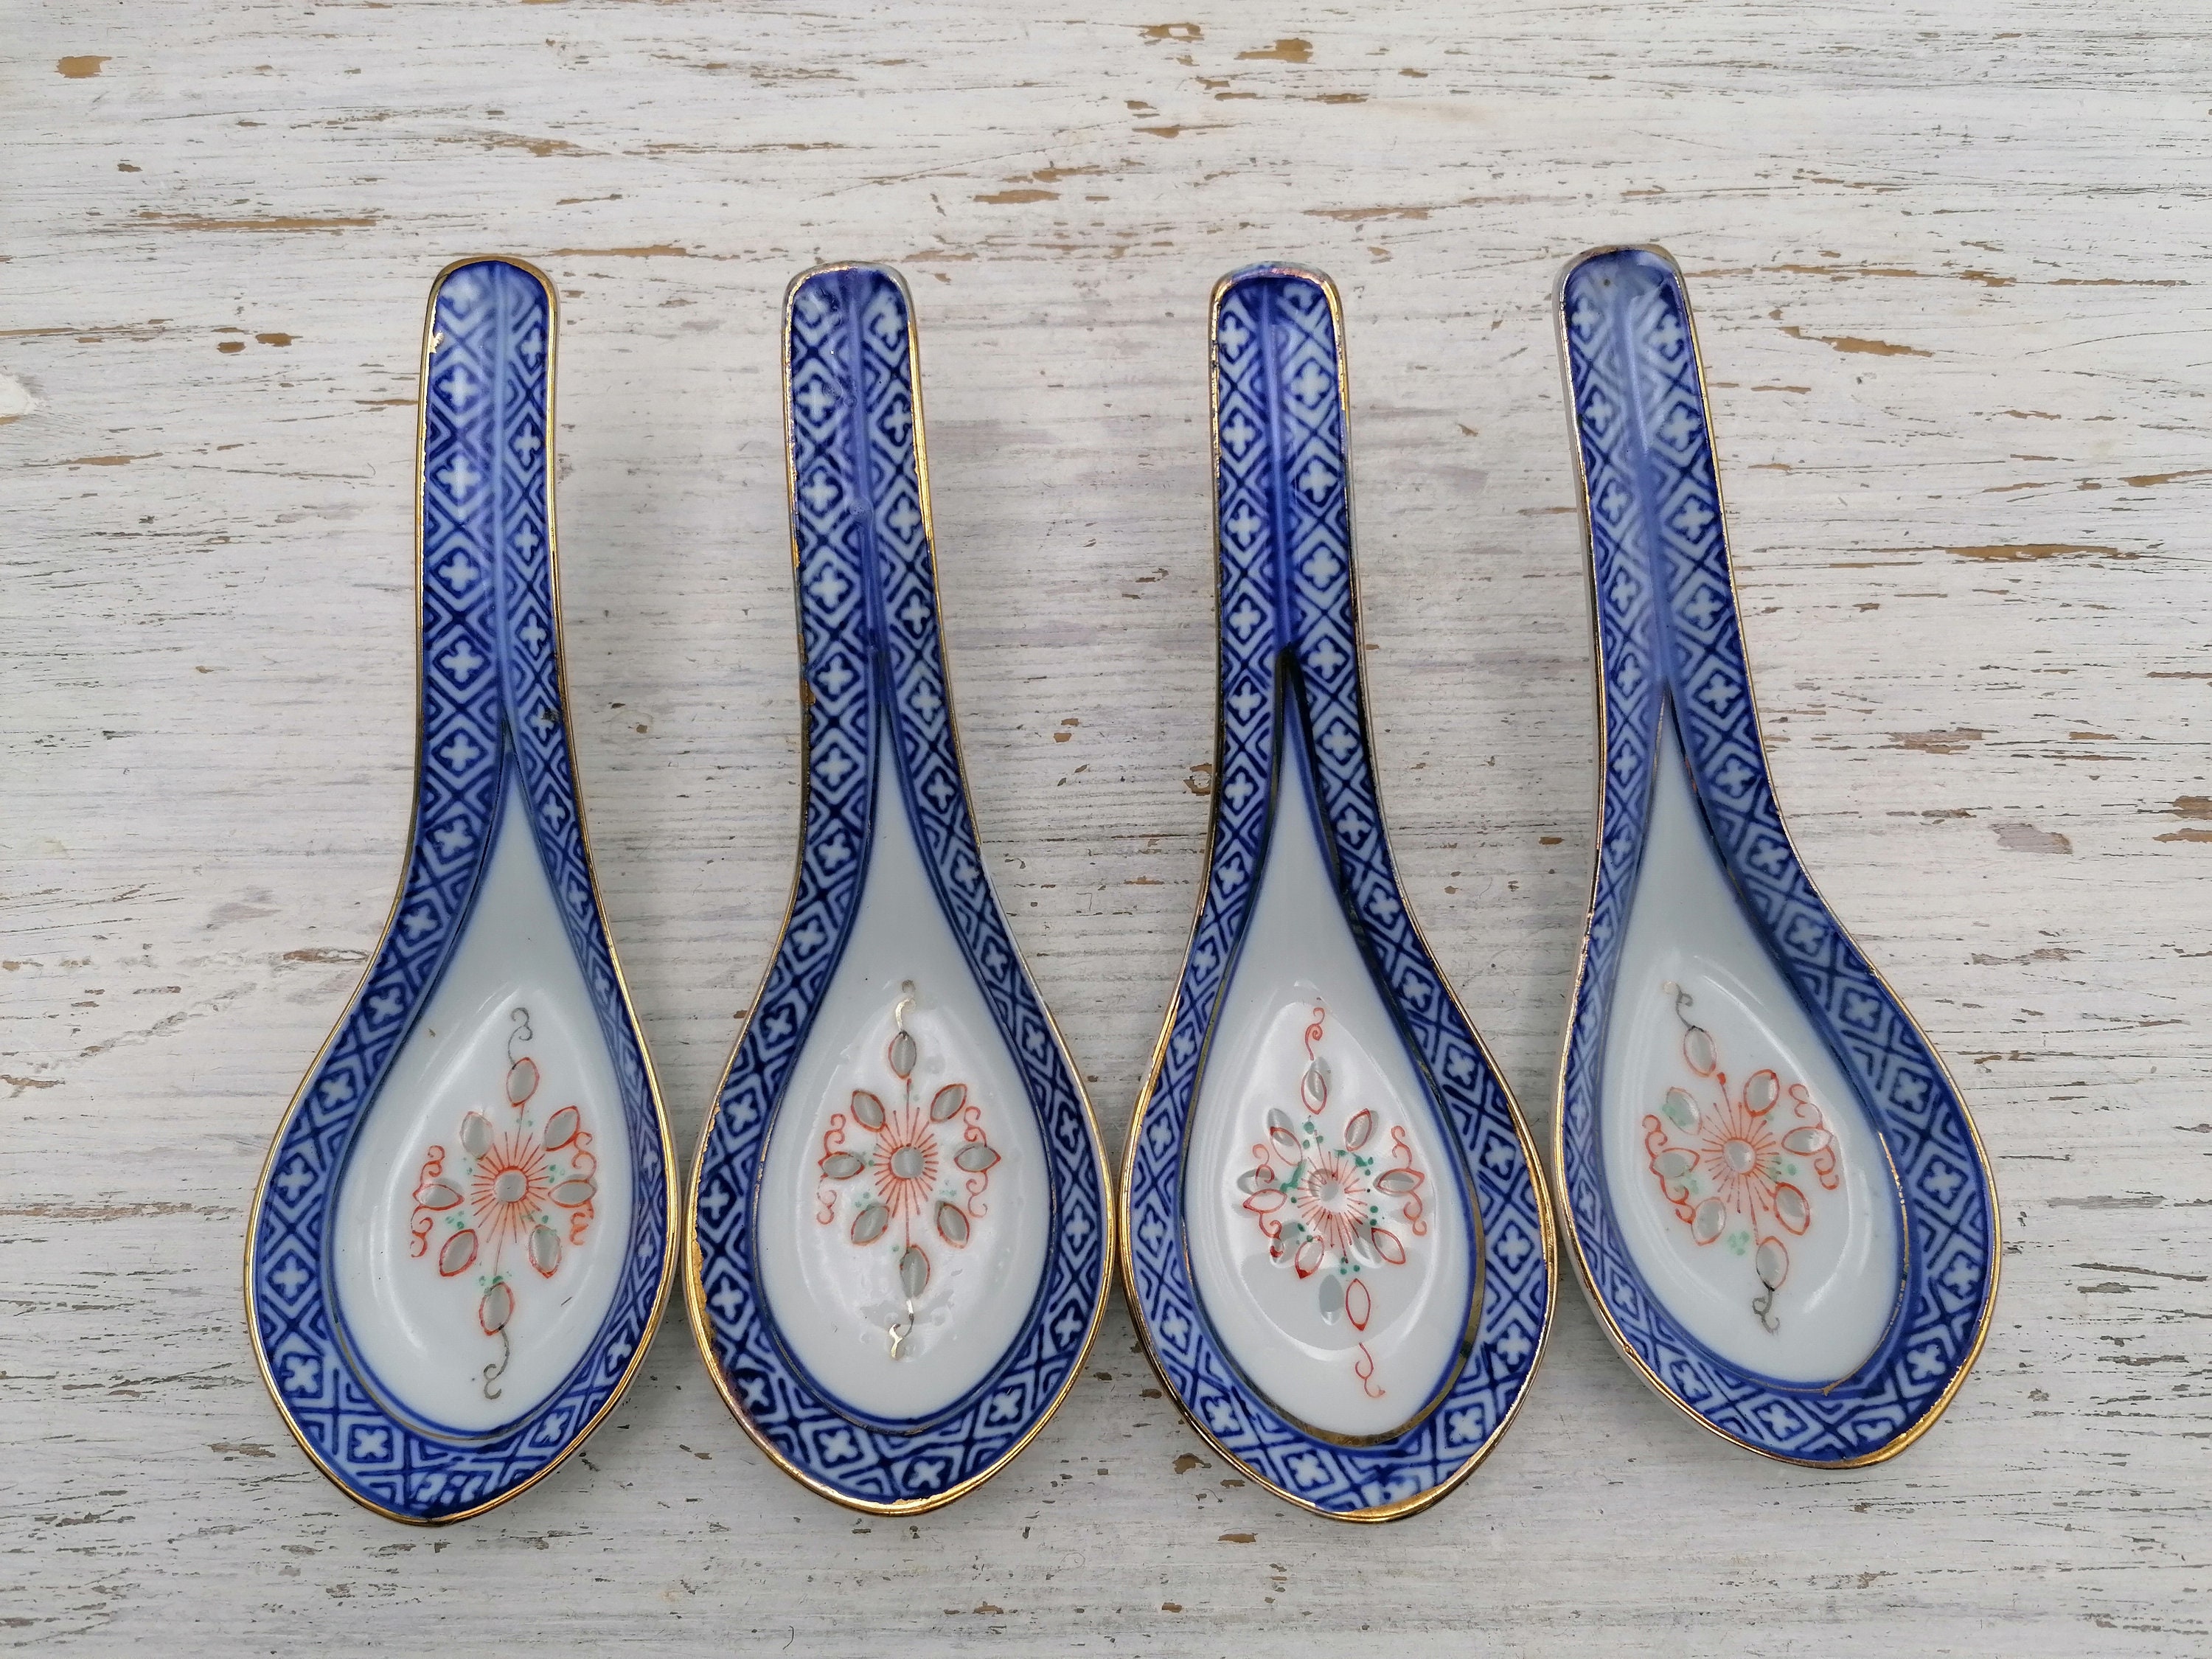 High Stainless Steel Soup Spoon Asian Rice Spoon Set of 4 Bisda Blue Table Spoon 